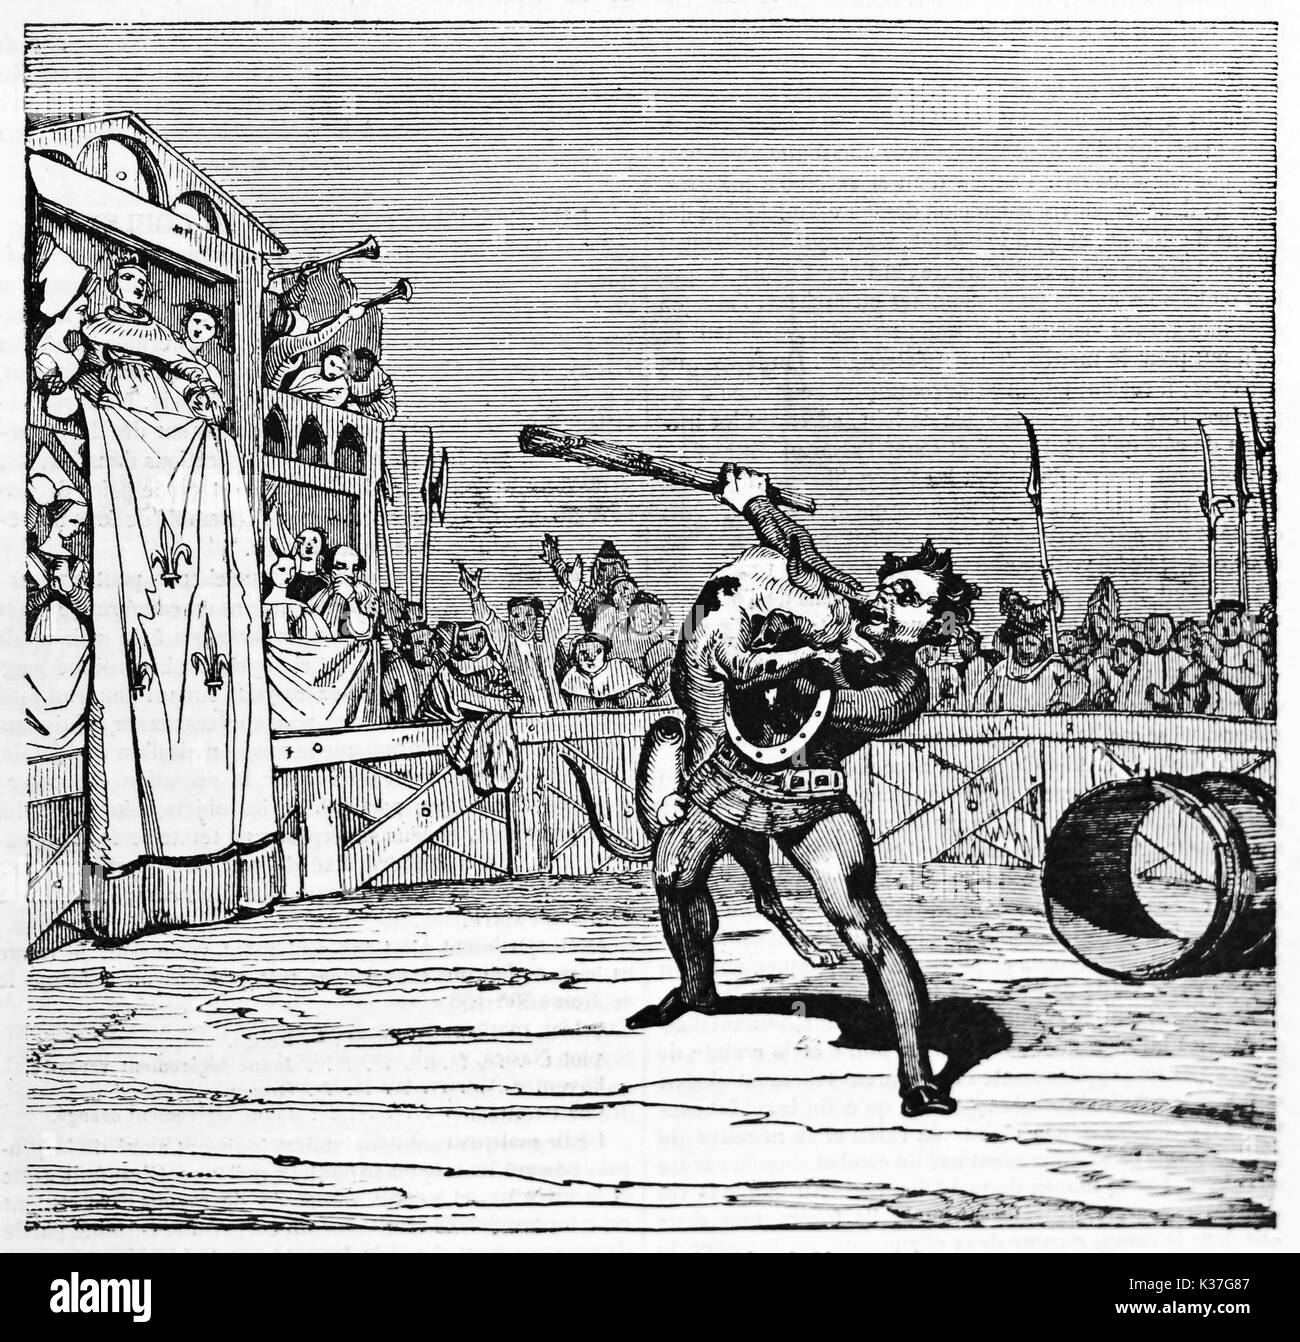 The dog and Macarie fighting in an arena as said medieval legend of Montargis dog. Old Illustration by unidentified author, published on Magasin Pittoresque, Paris, 1834 Stock Photo